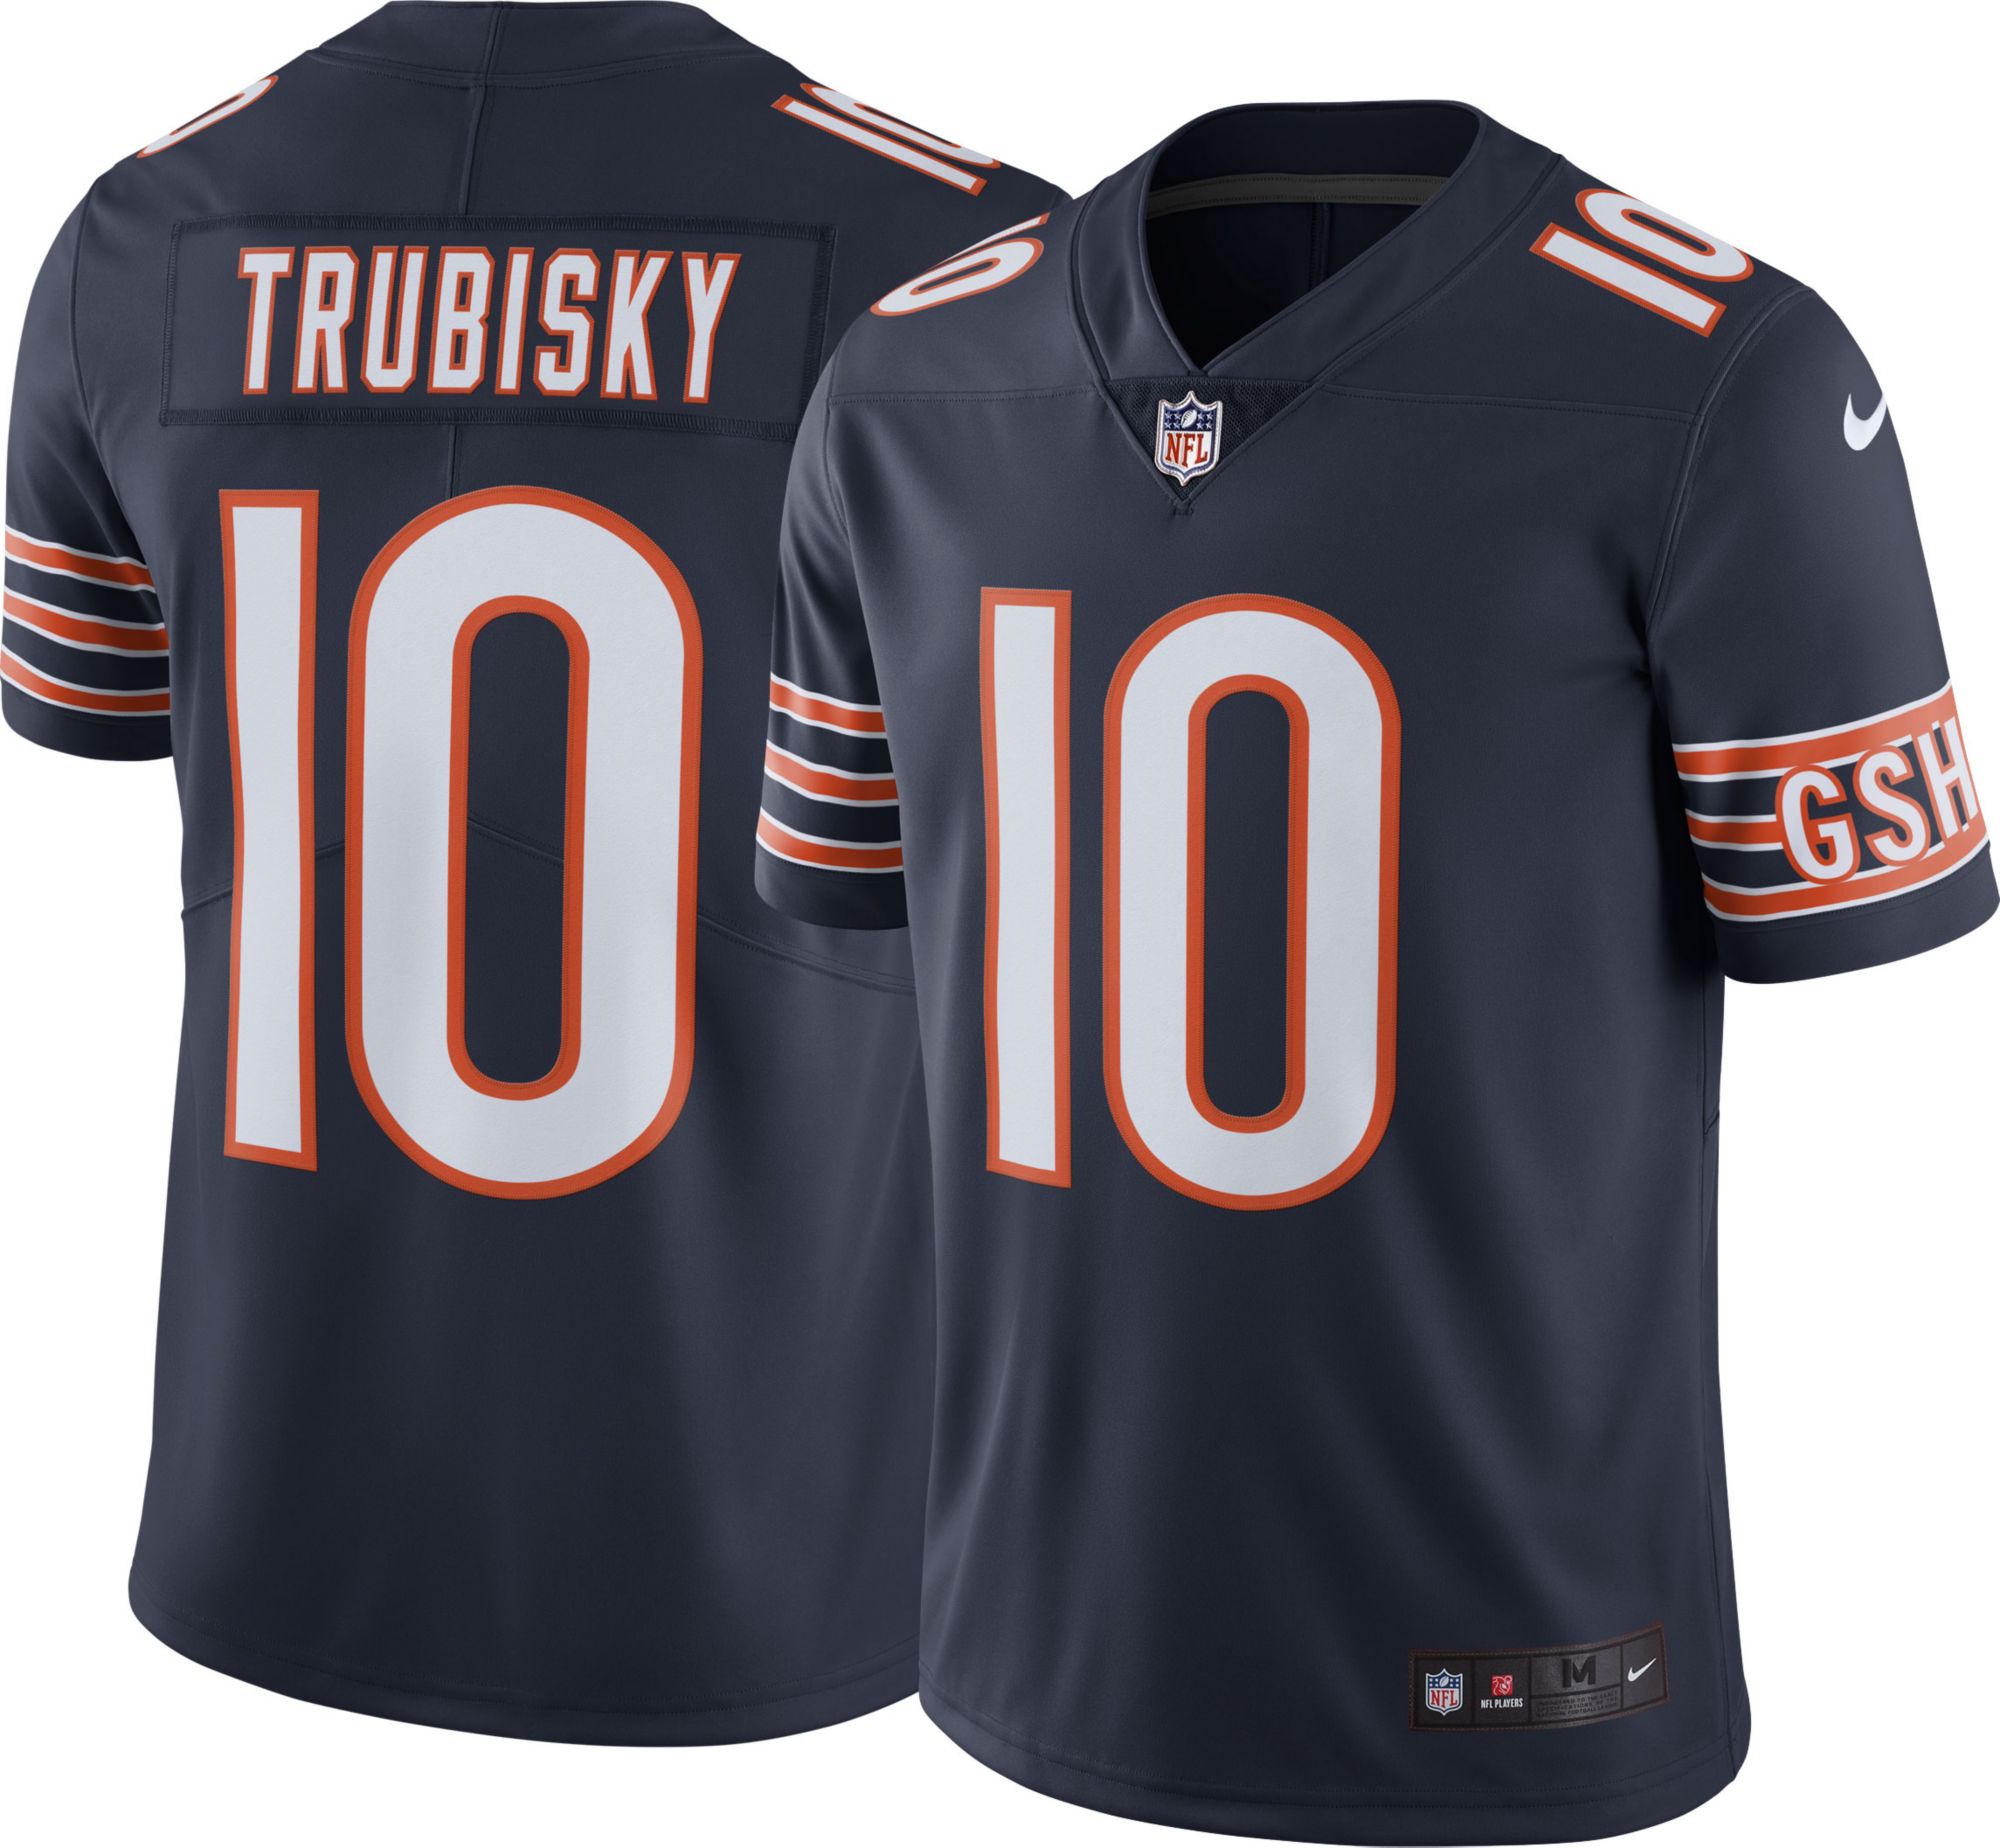 chicago bears jerseys for sale